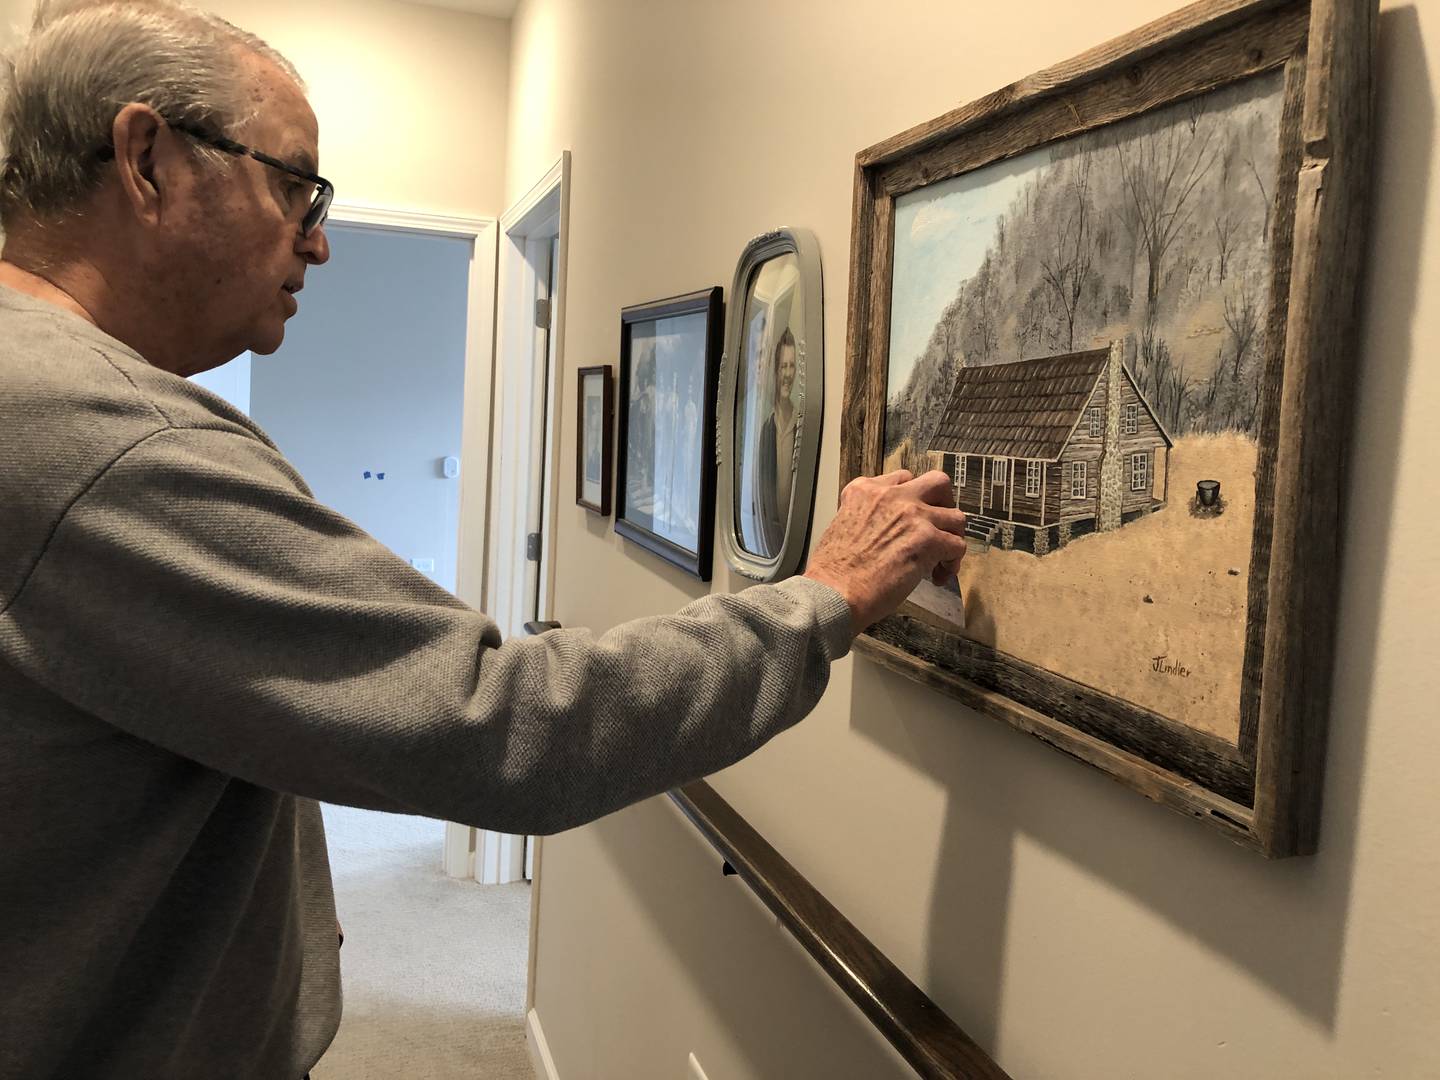 The apartment Charlie Farley and his wife, Linda, are set to move into already has family photos on the walls as of Thursday, Feb. 23, 2022. The couple will be among the first Cedarhurst of McHenry residents.